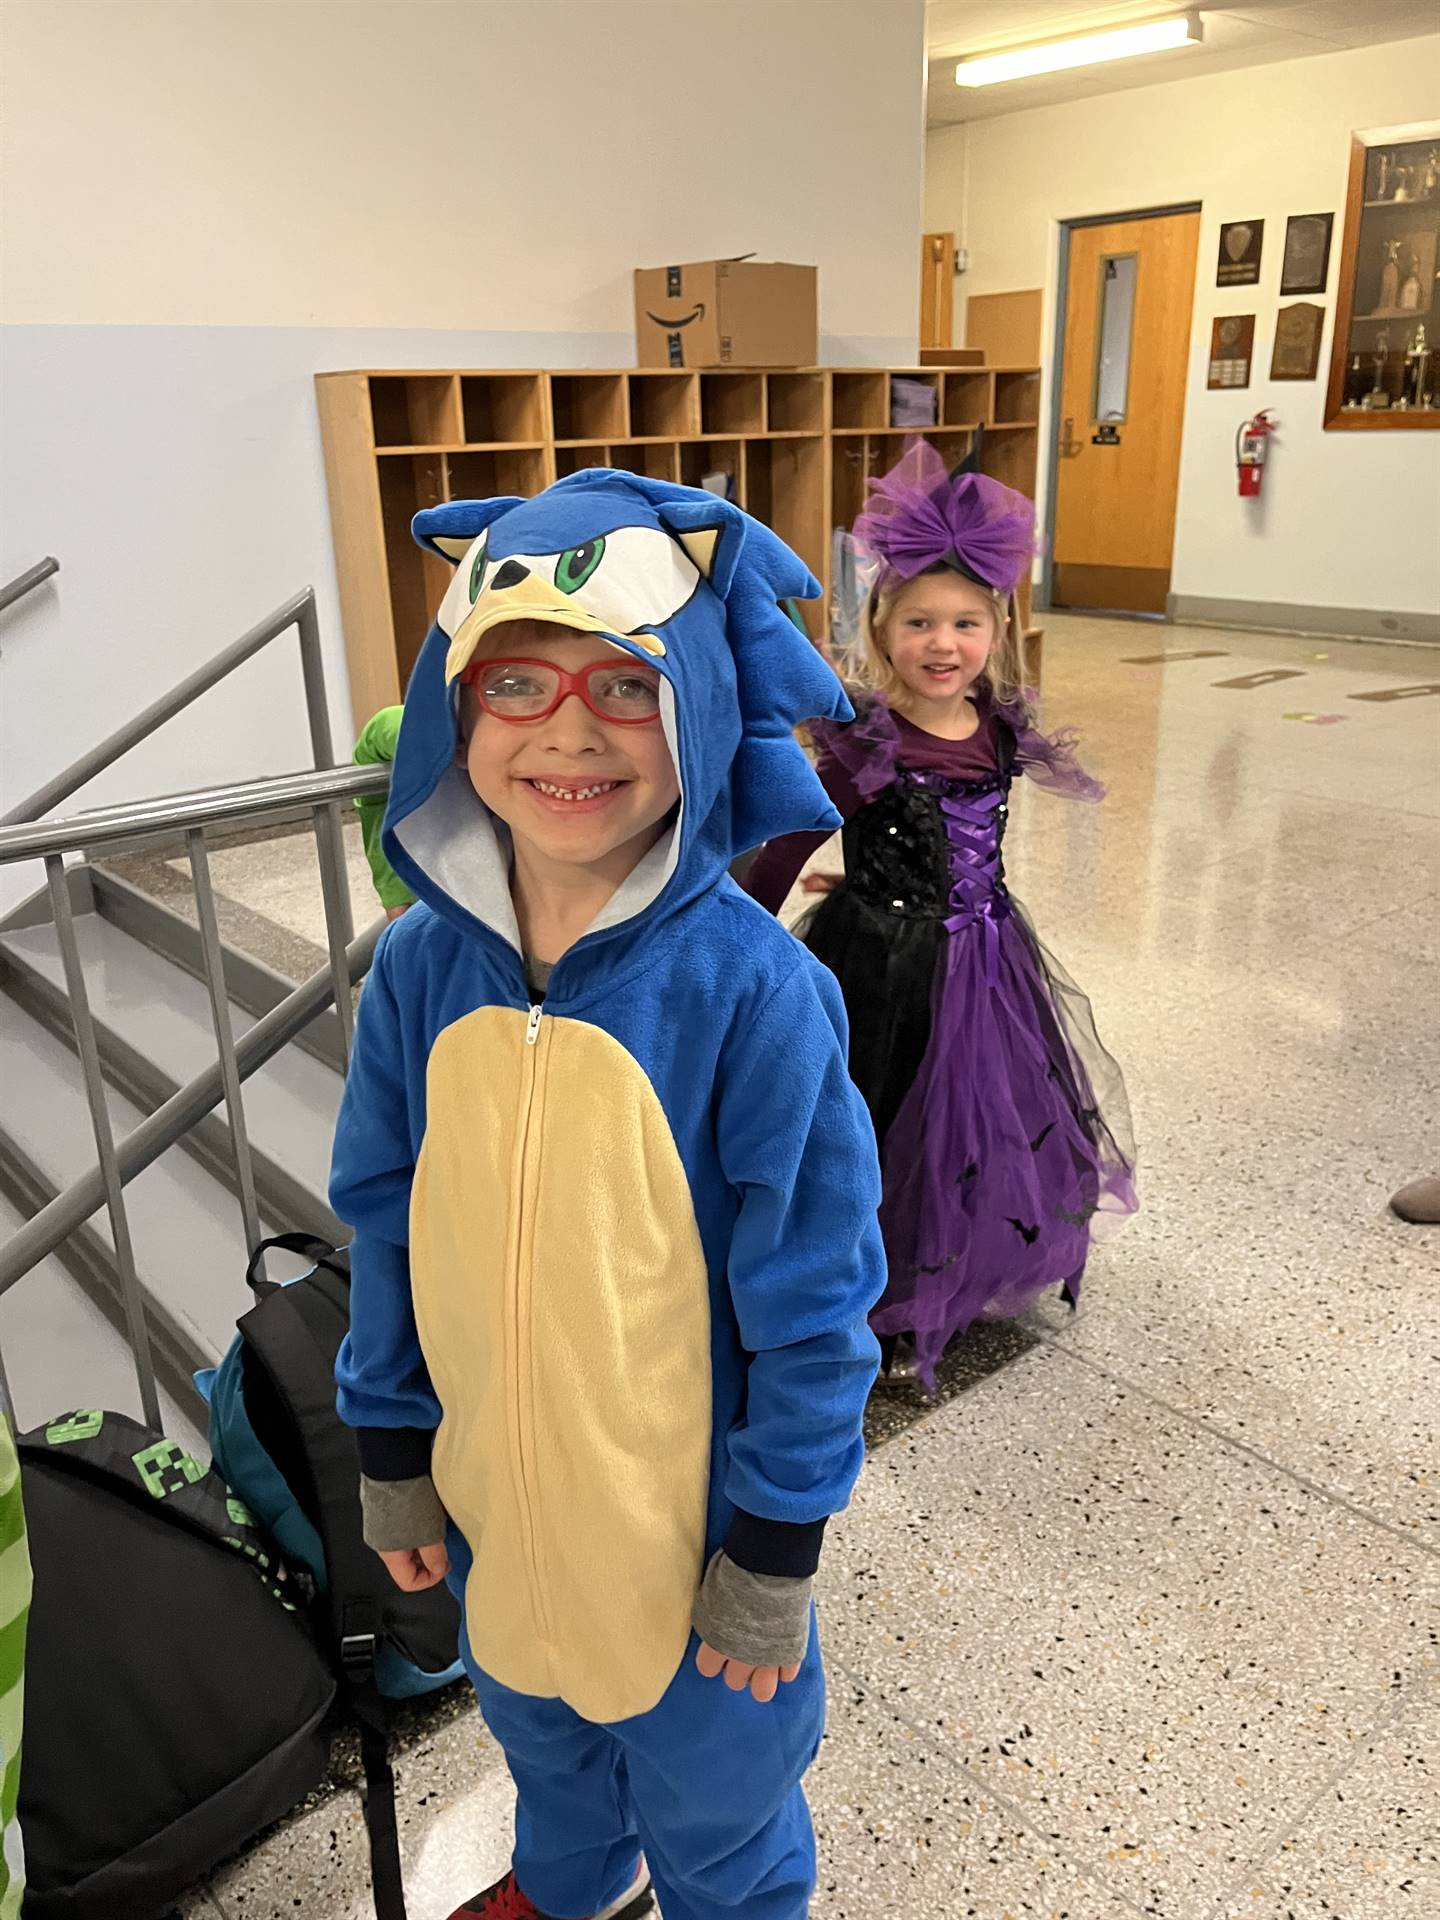 A student dressed up in blue for halloween